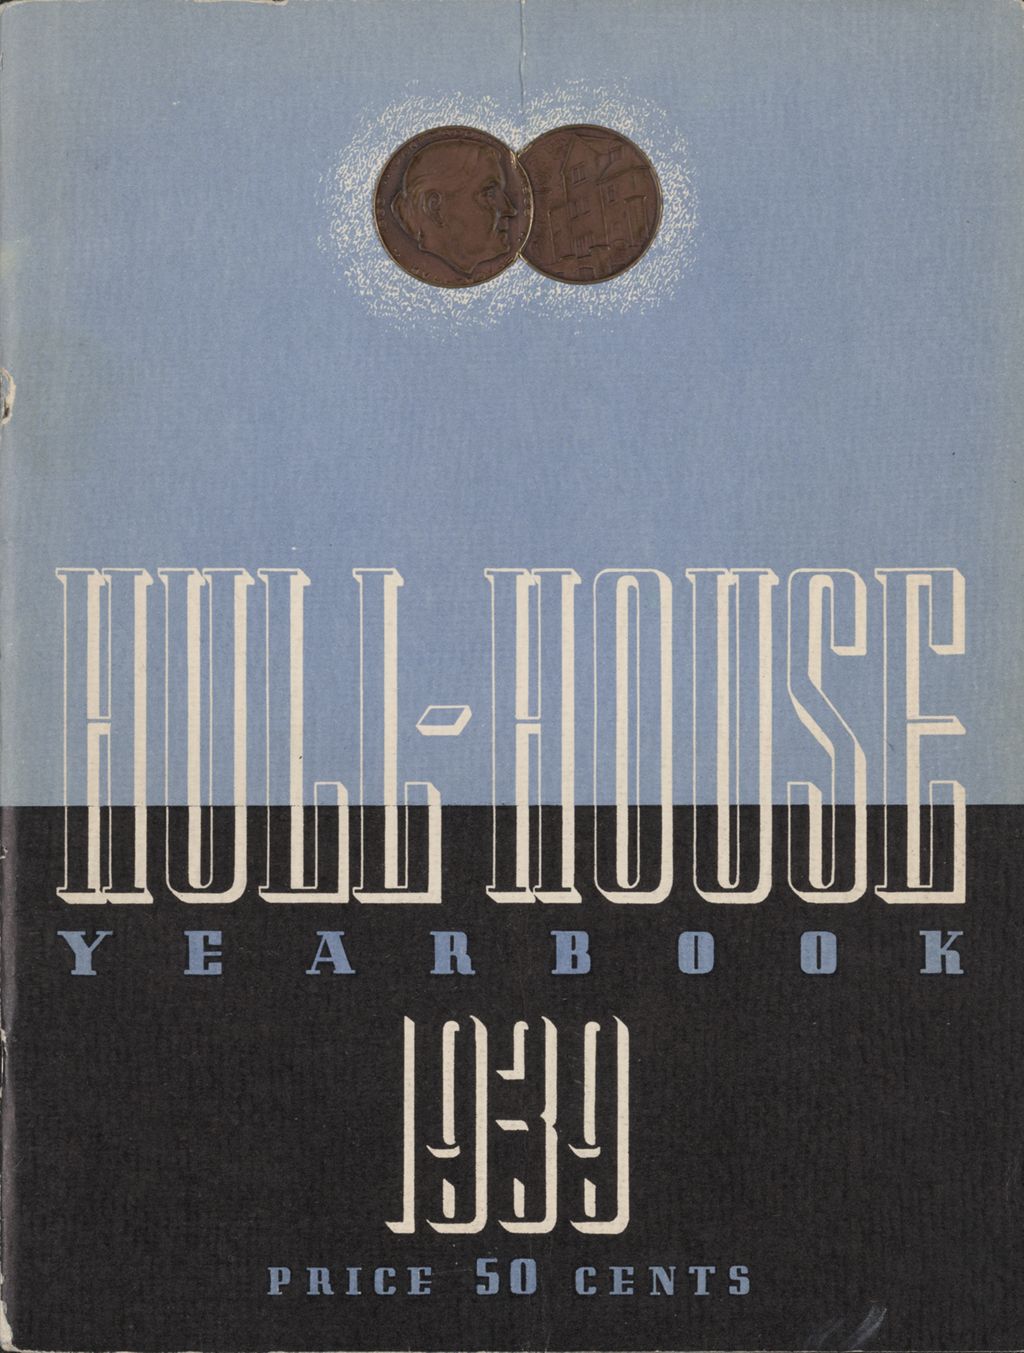 Miniature of Hull-House Year Book, 1939